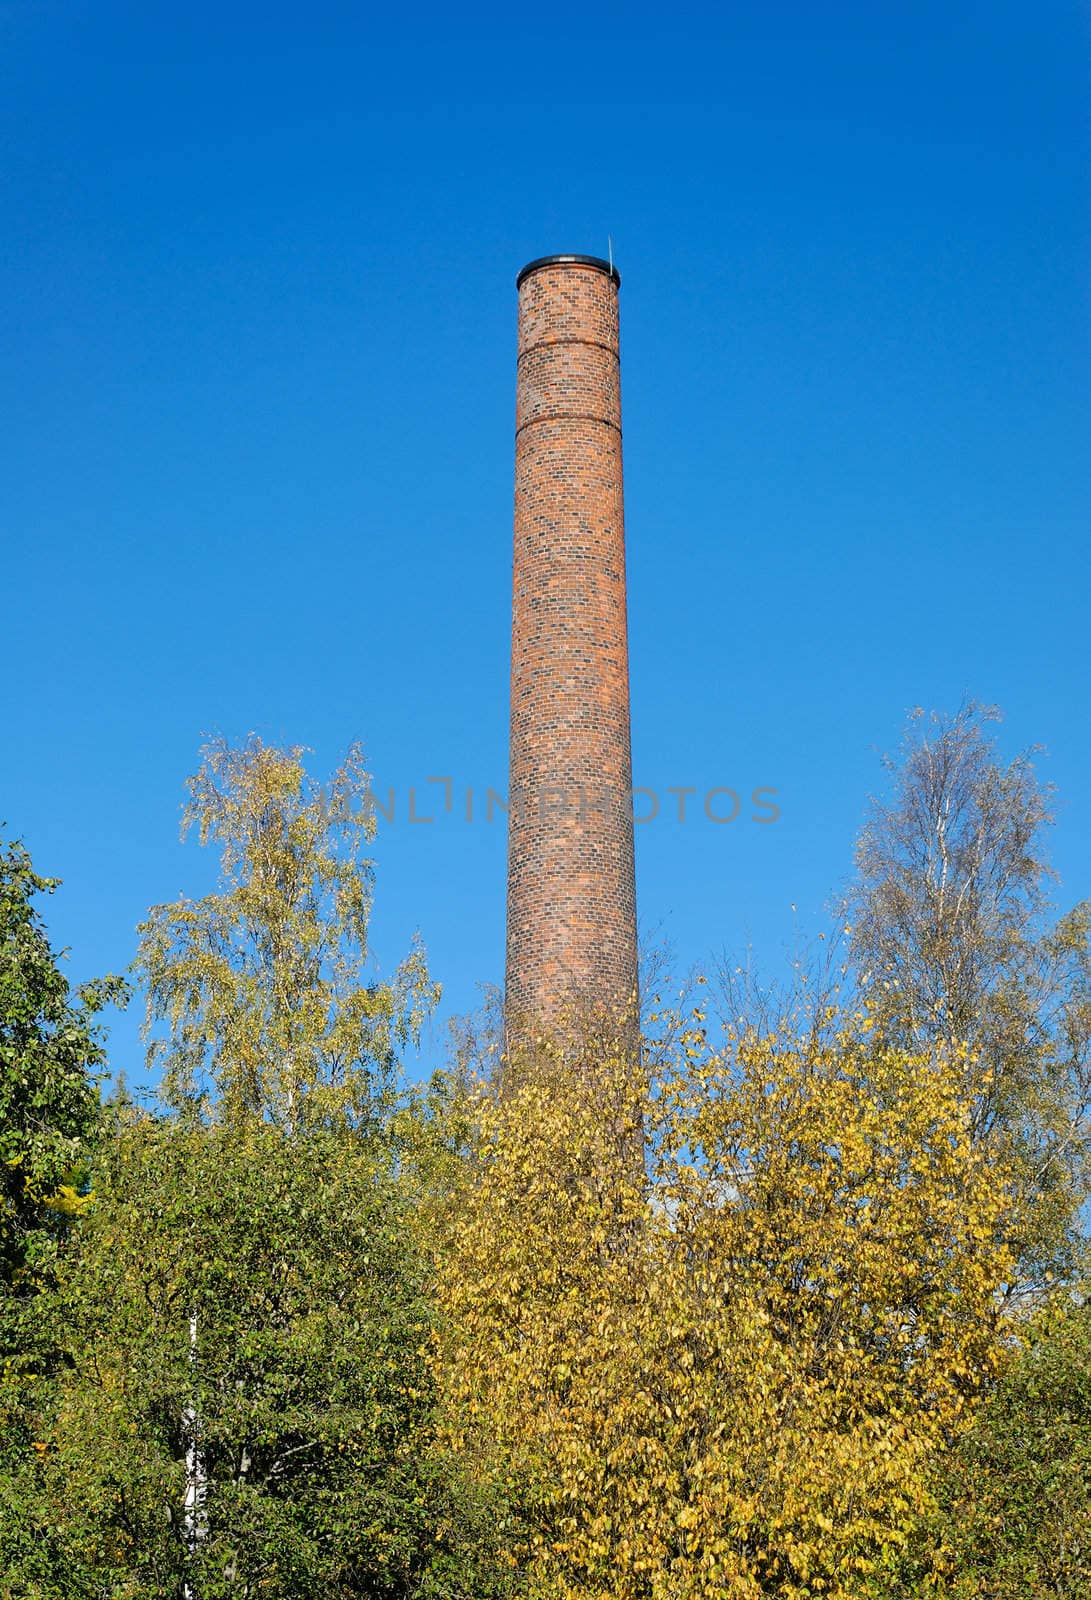 Factory Chimney Behind Trees  by Nemo1024